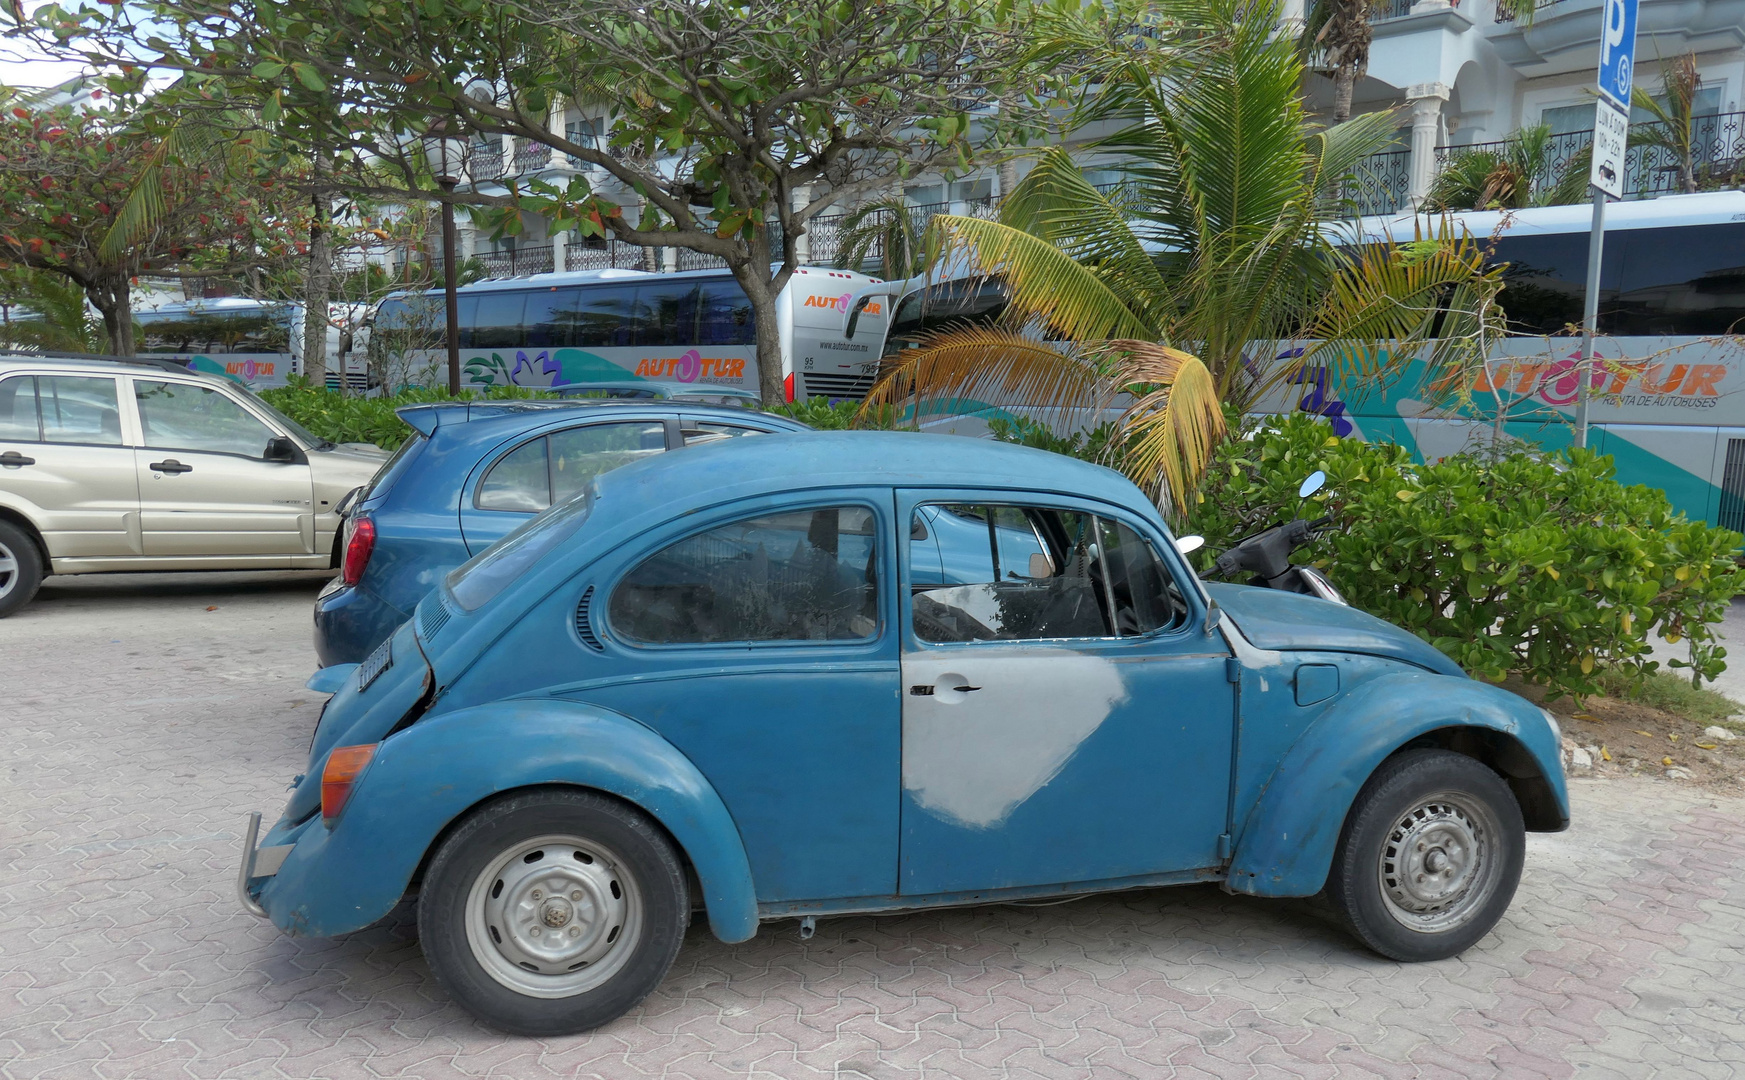 Herbie in Mexico